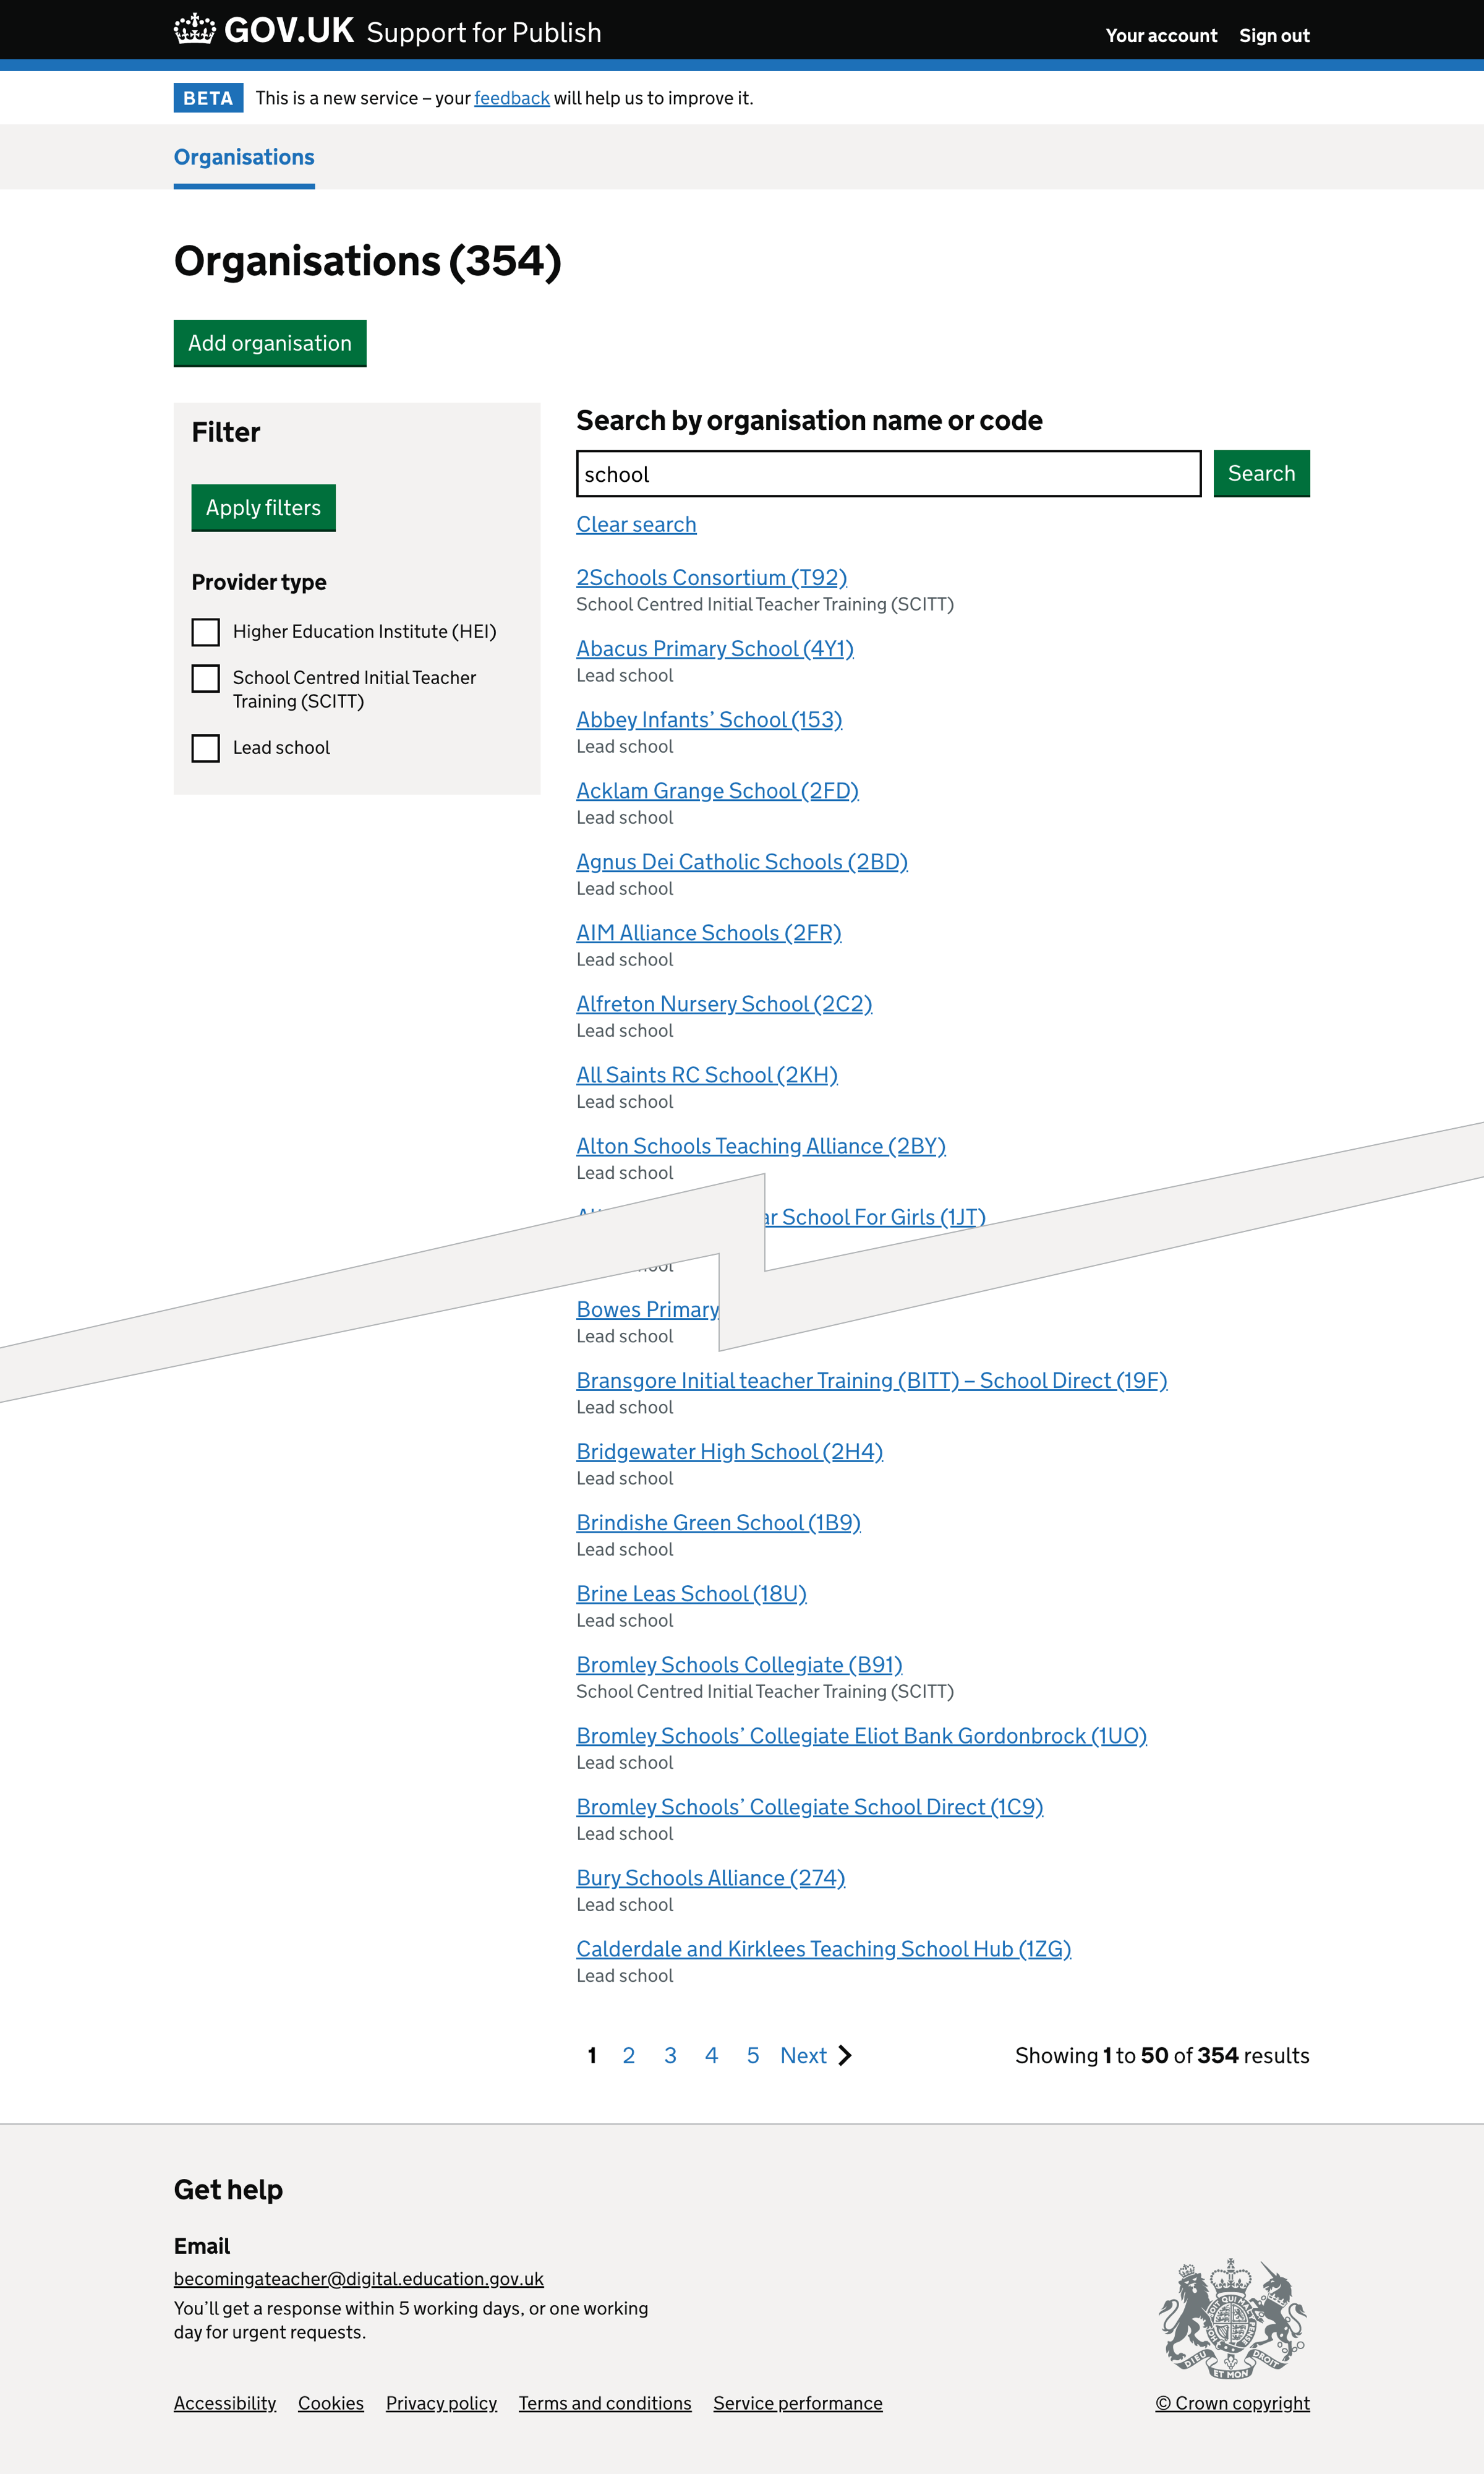 Screenshot of List of organisations with search applied